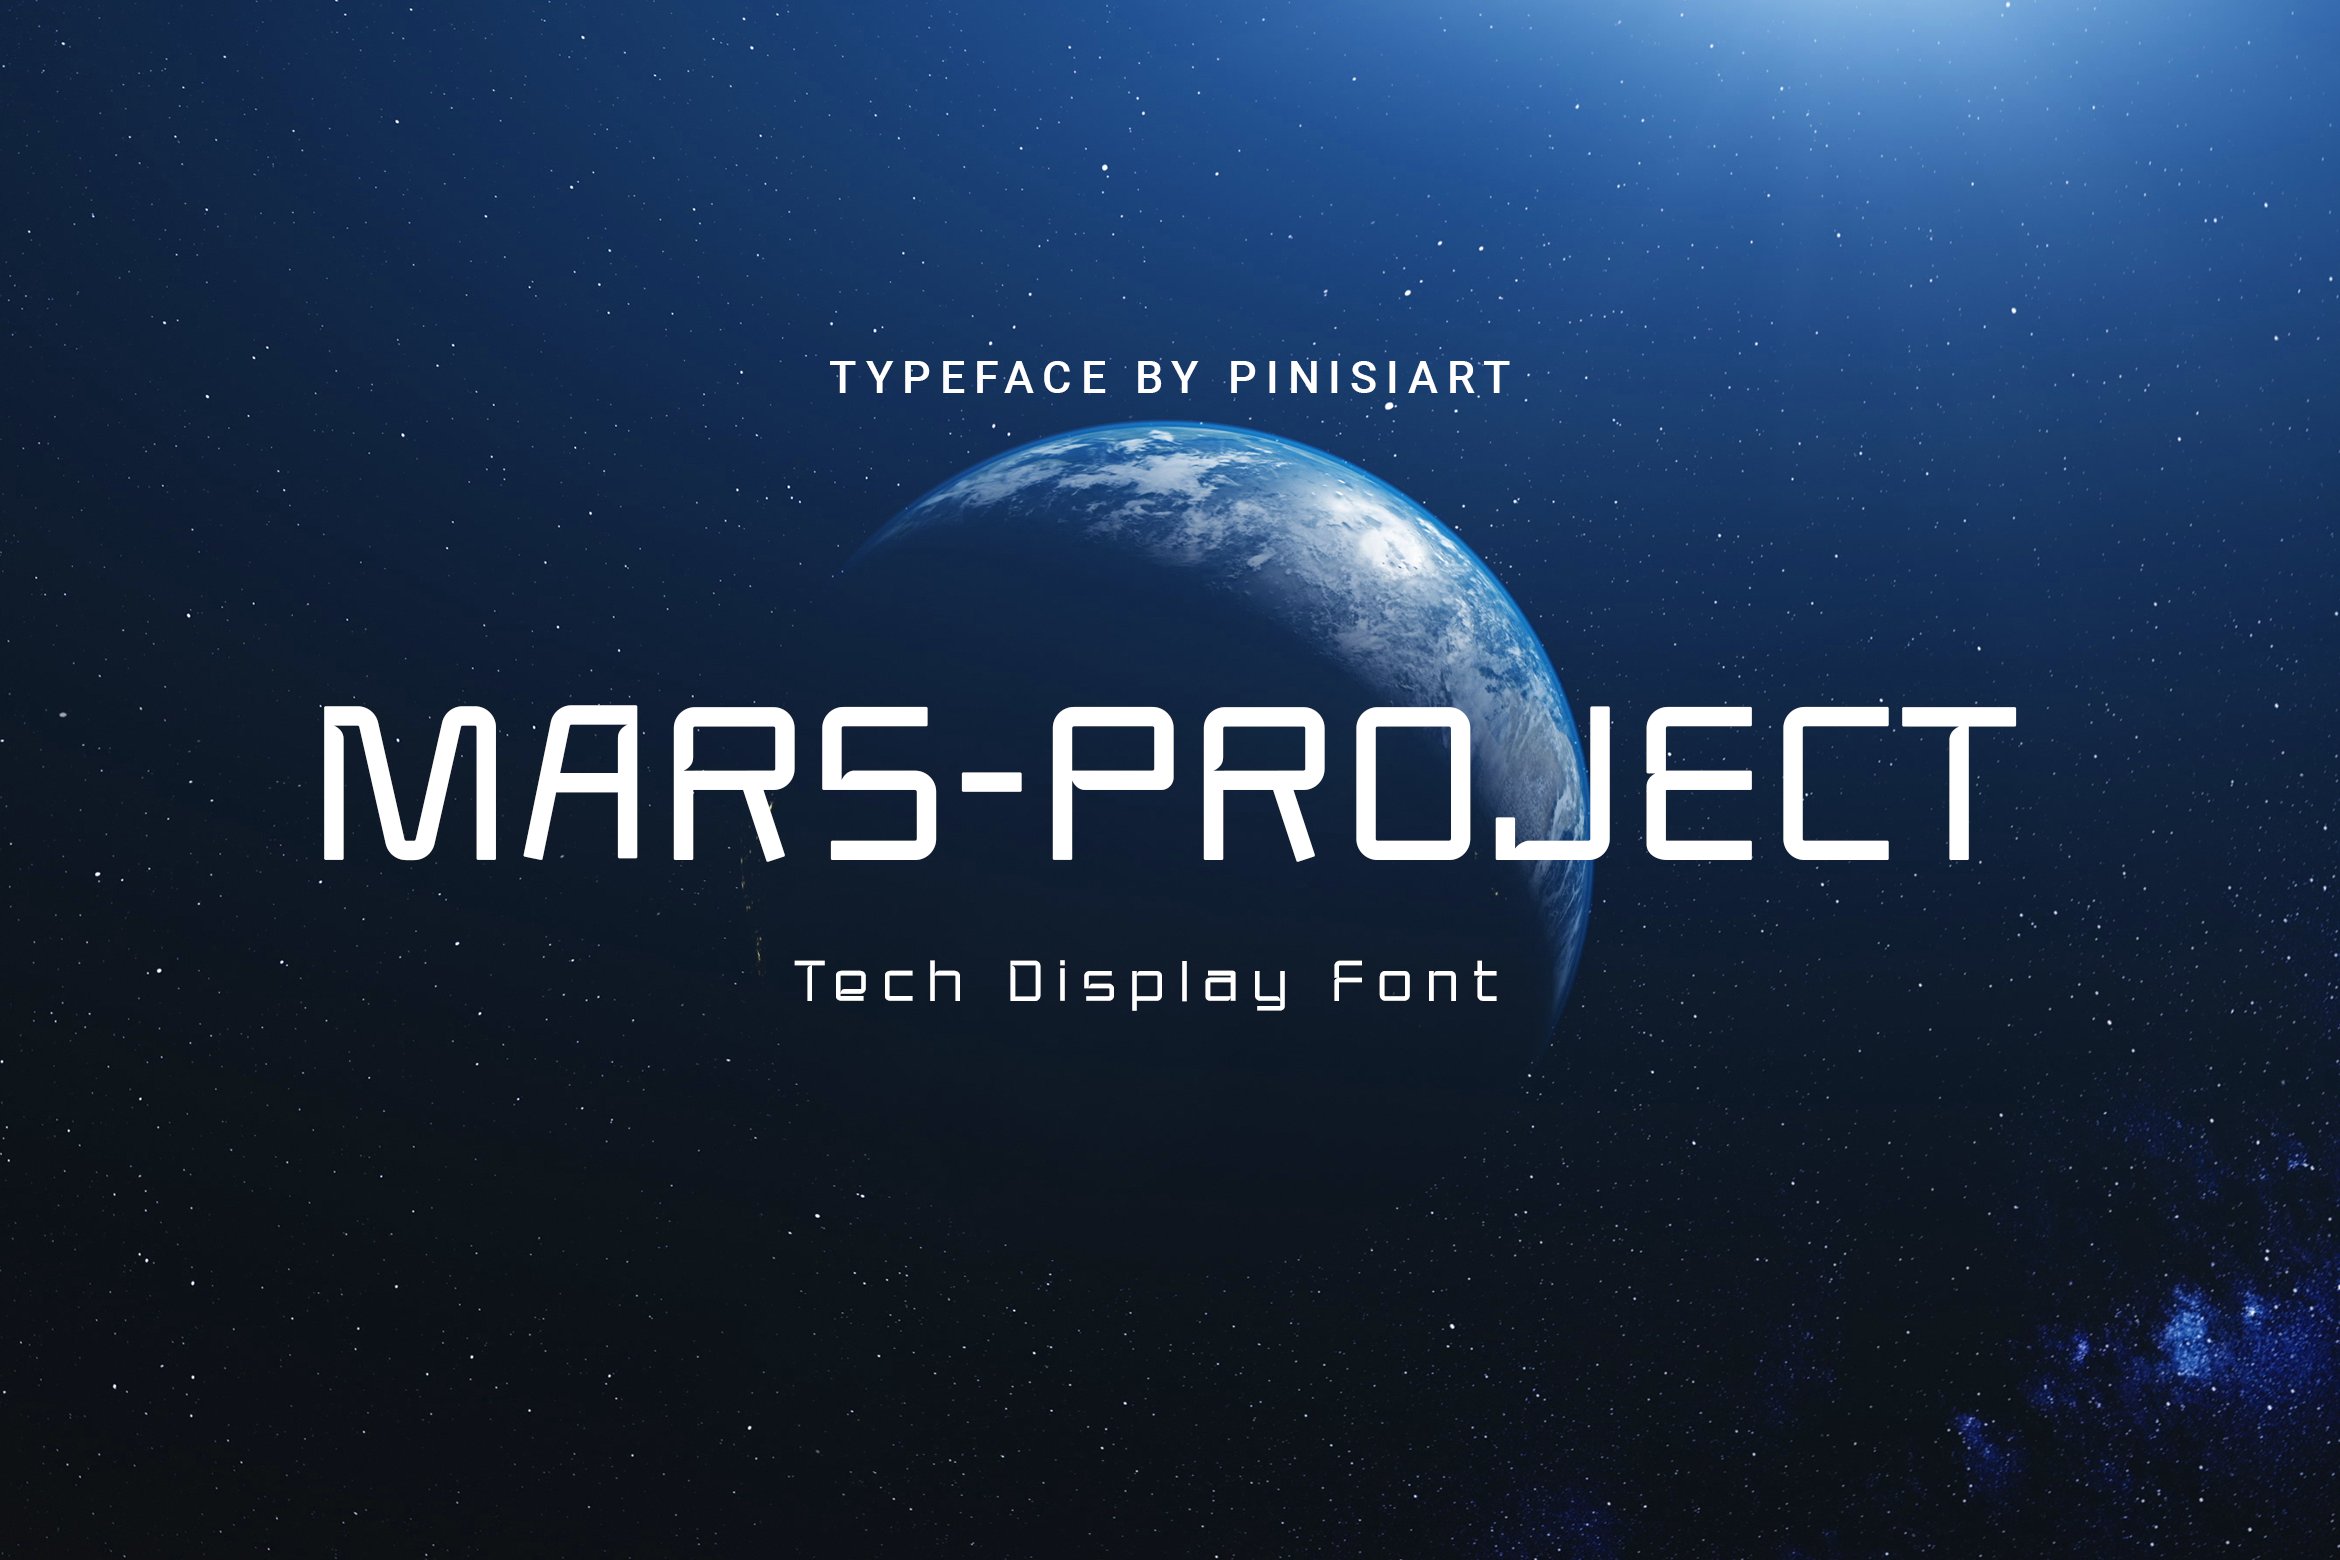 Mars Project – Techno Display Font cover image.